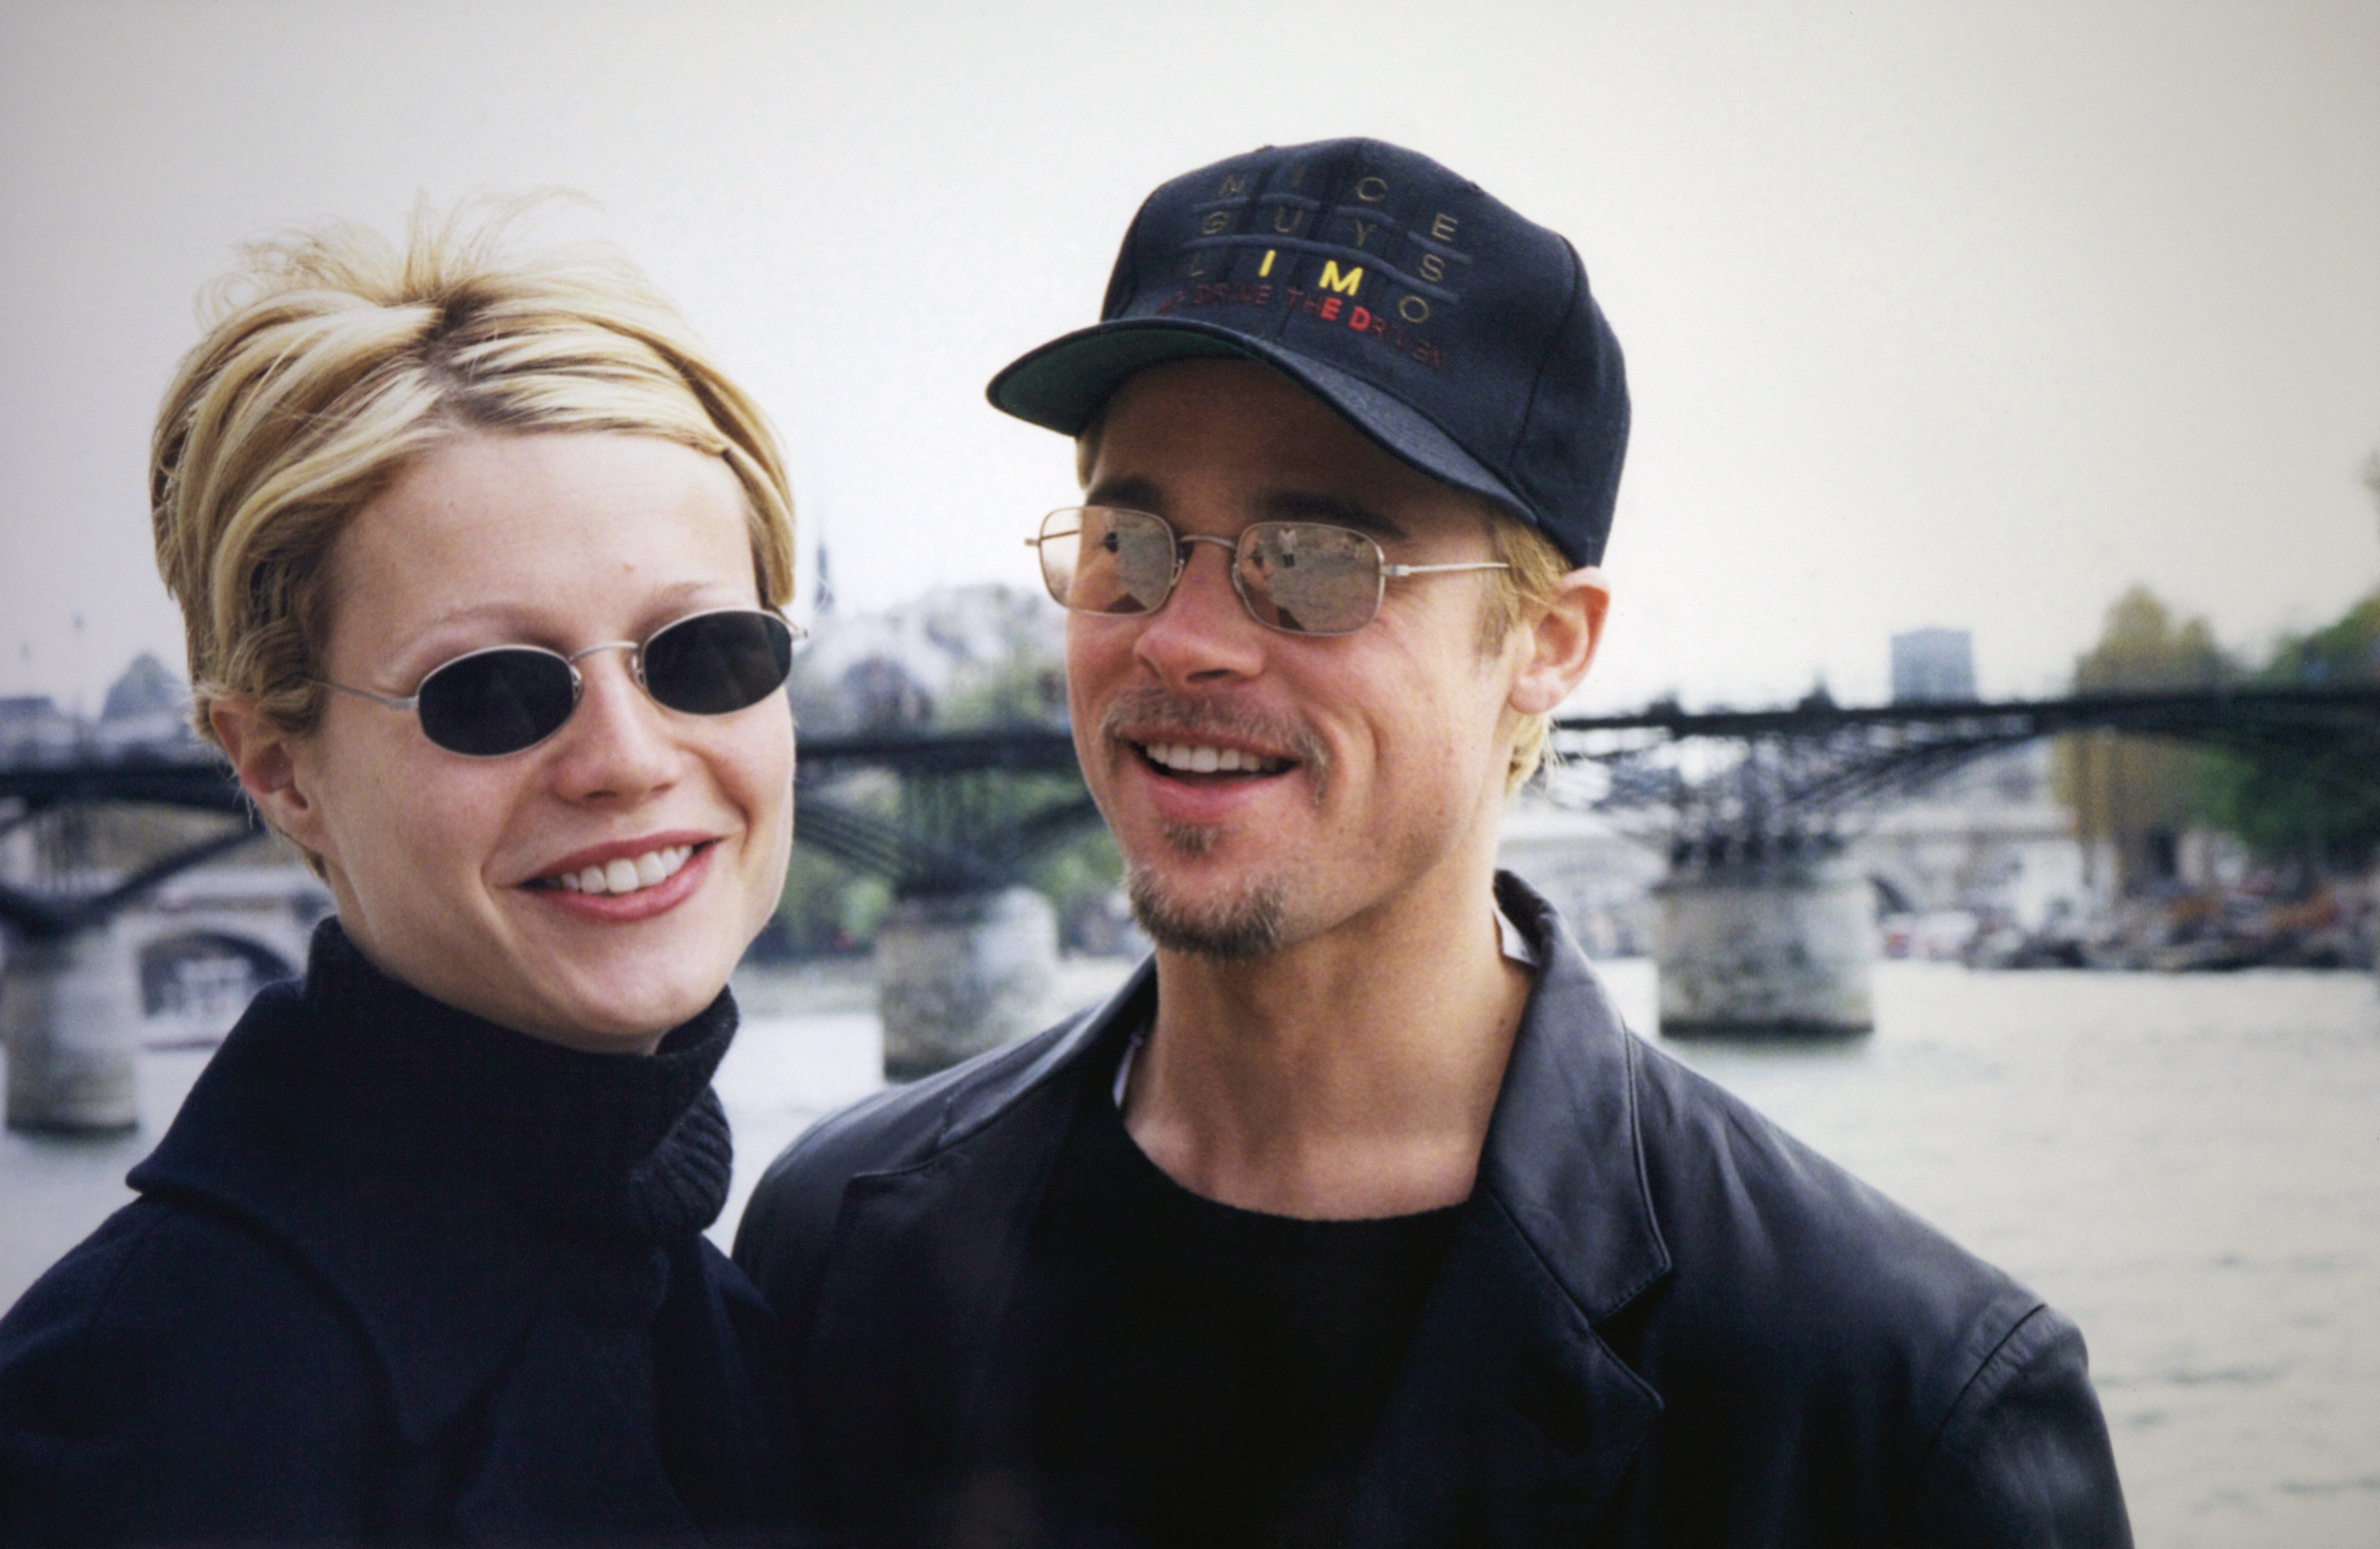 Brad Pitt and Gwyneth Paltrow at Paris, France on March 29, 1997. | Photo: Getty Images